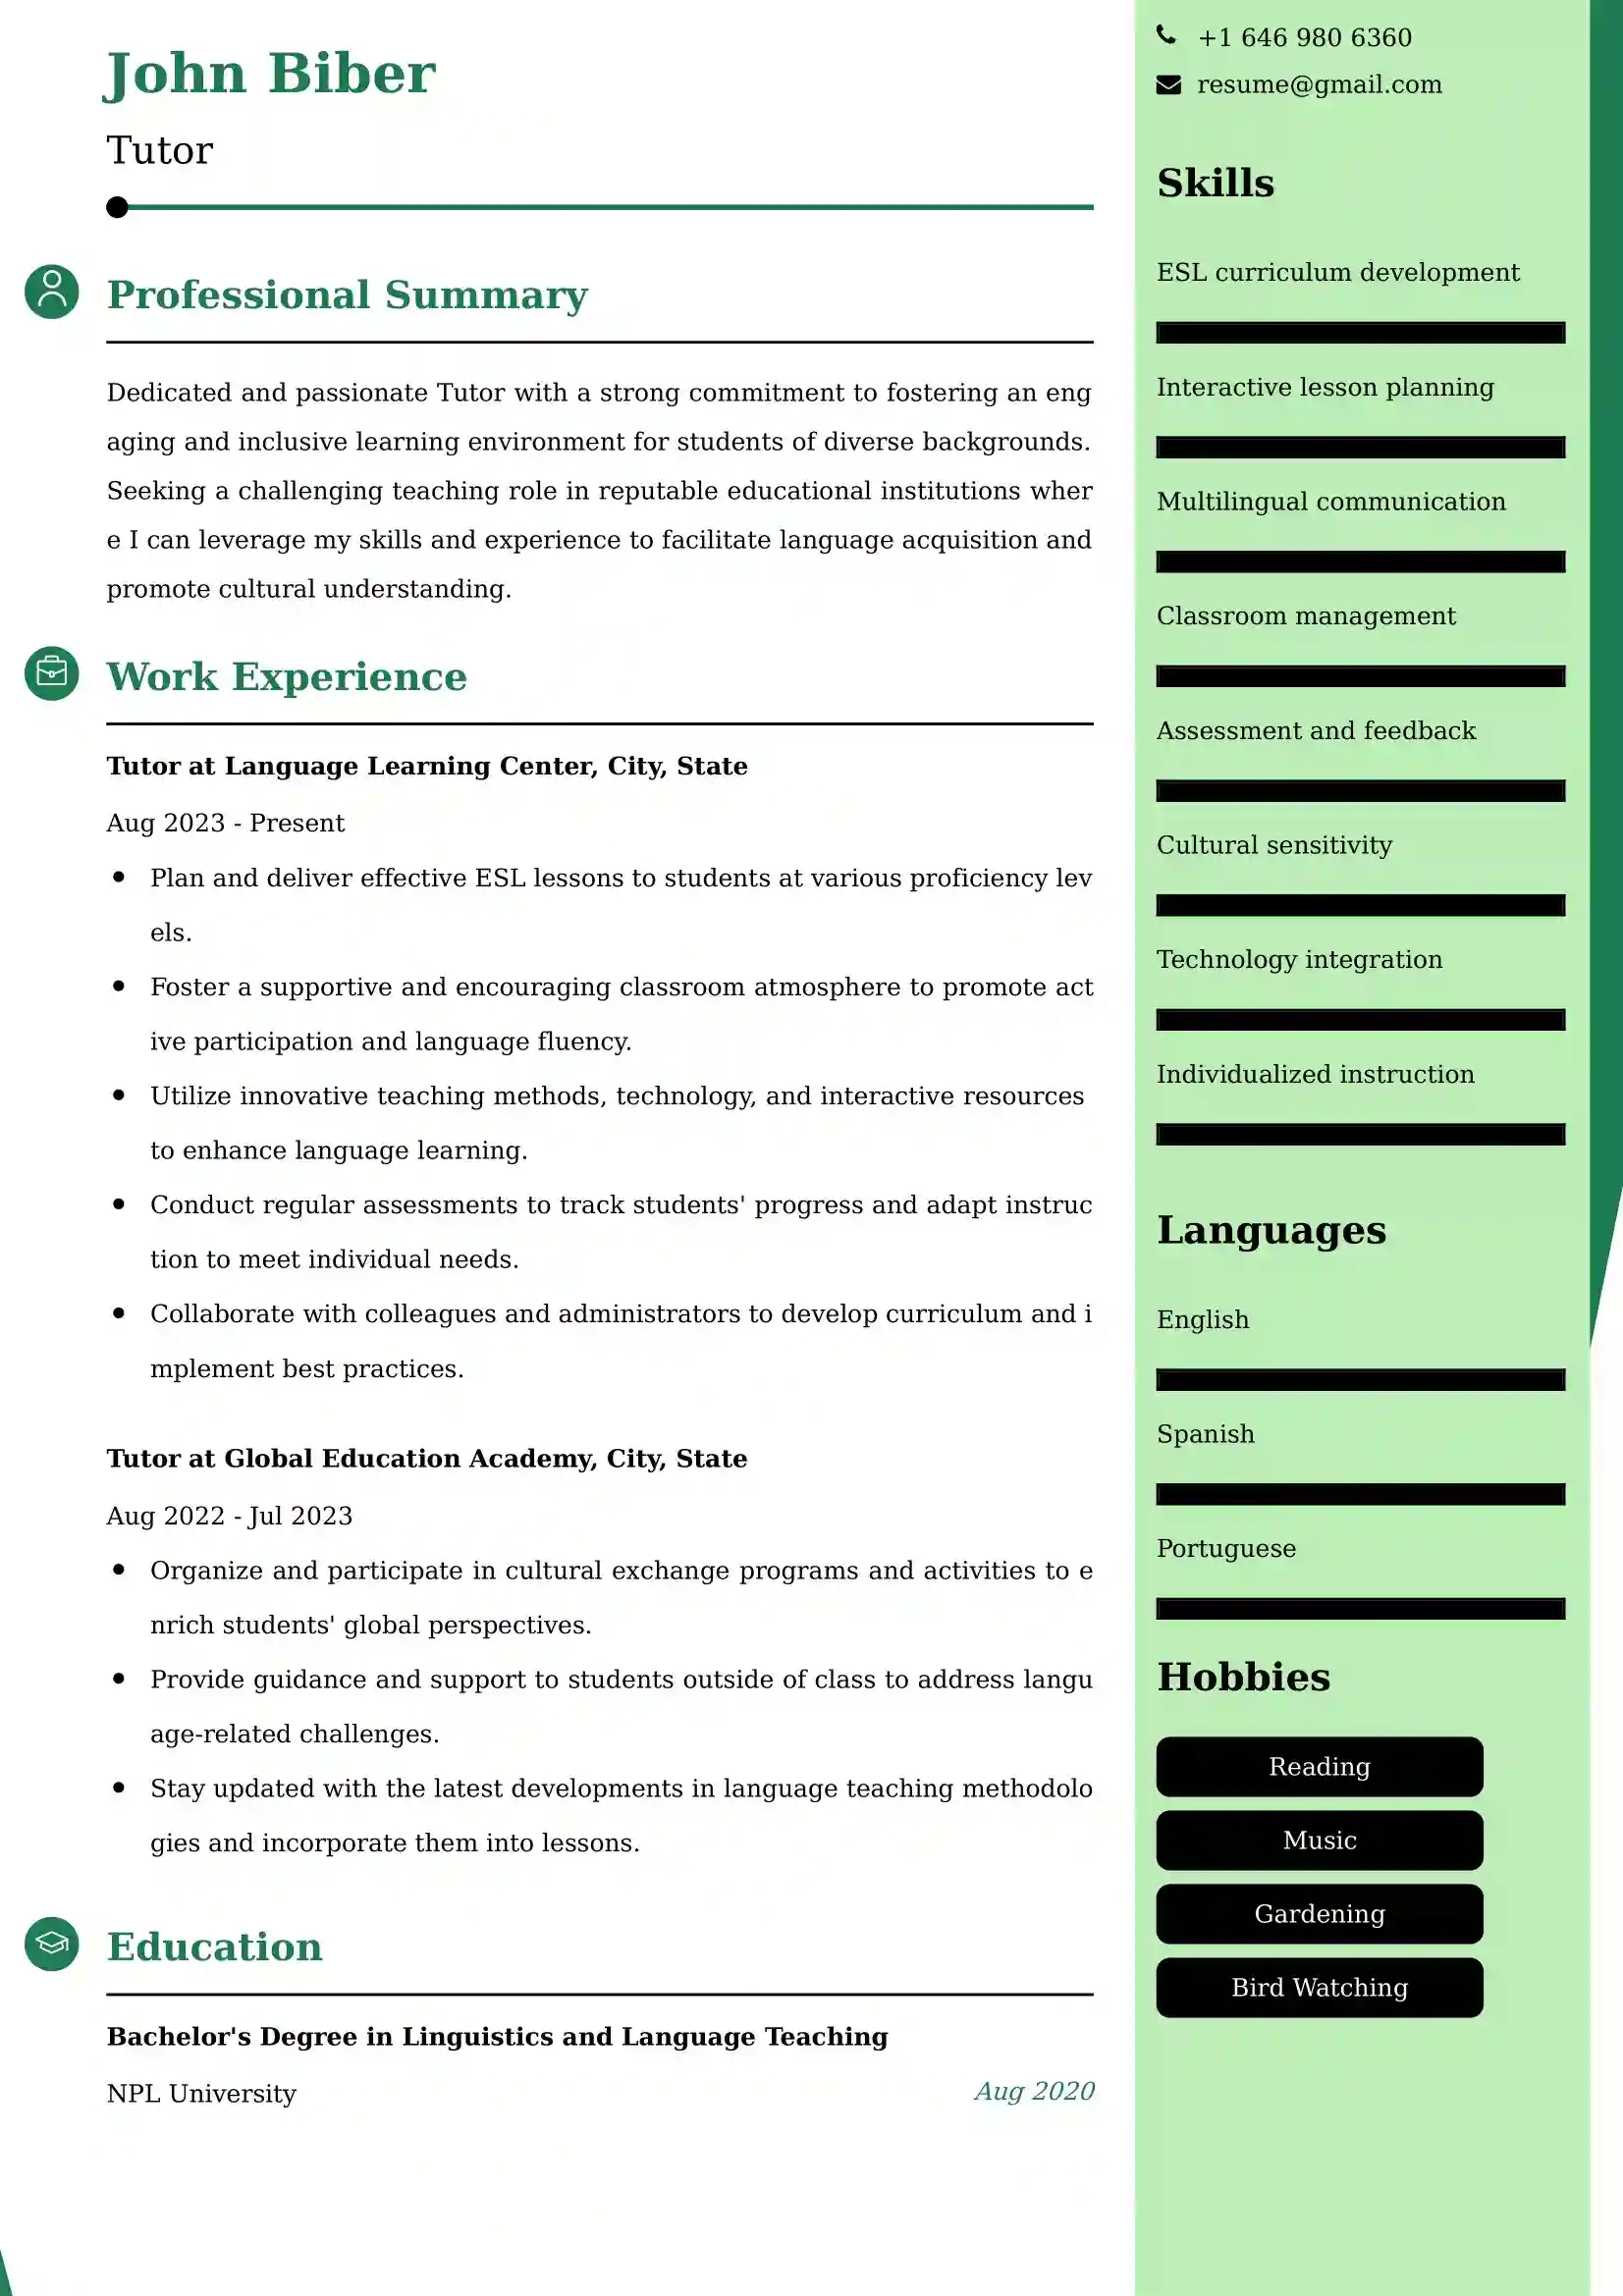 Tutor Resume Examples - UK Format, Latest Template.